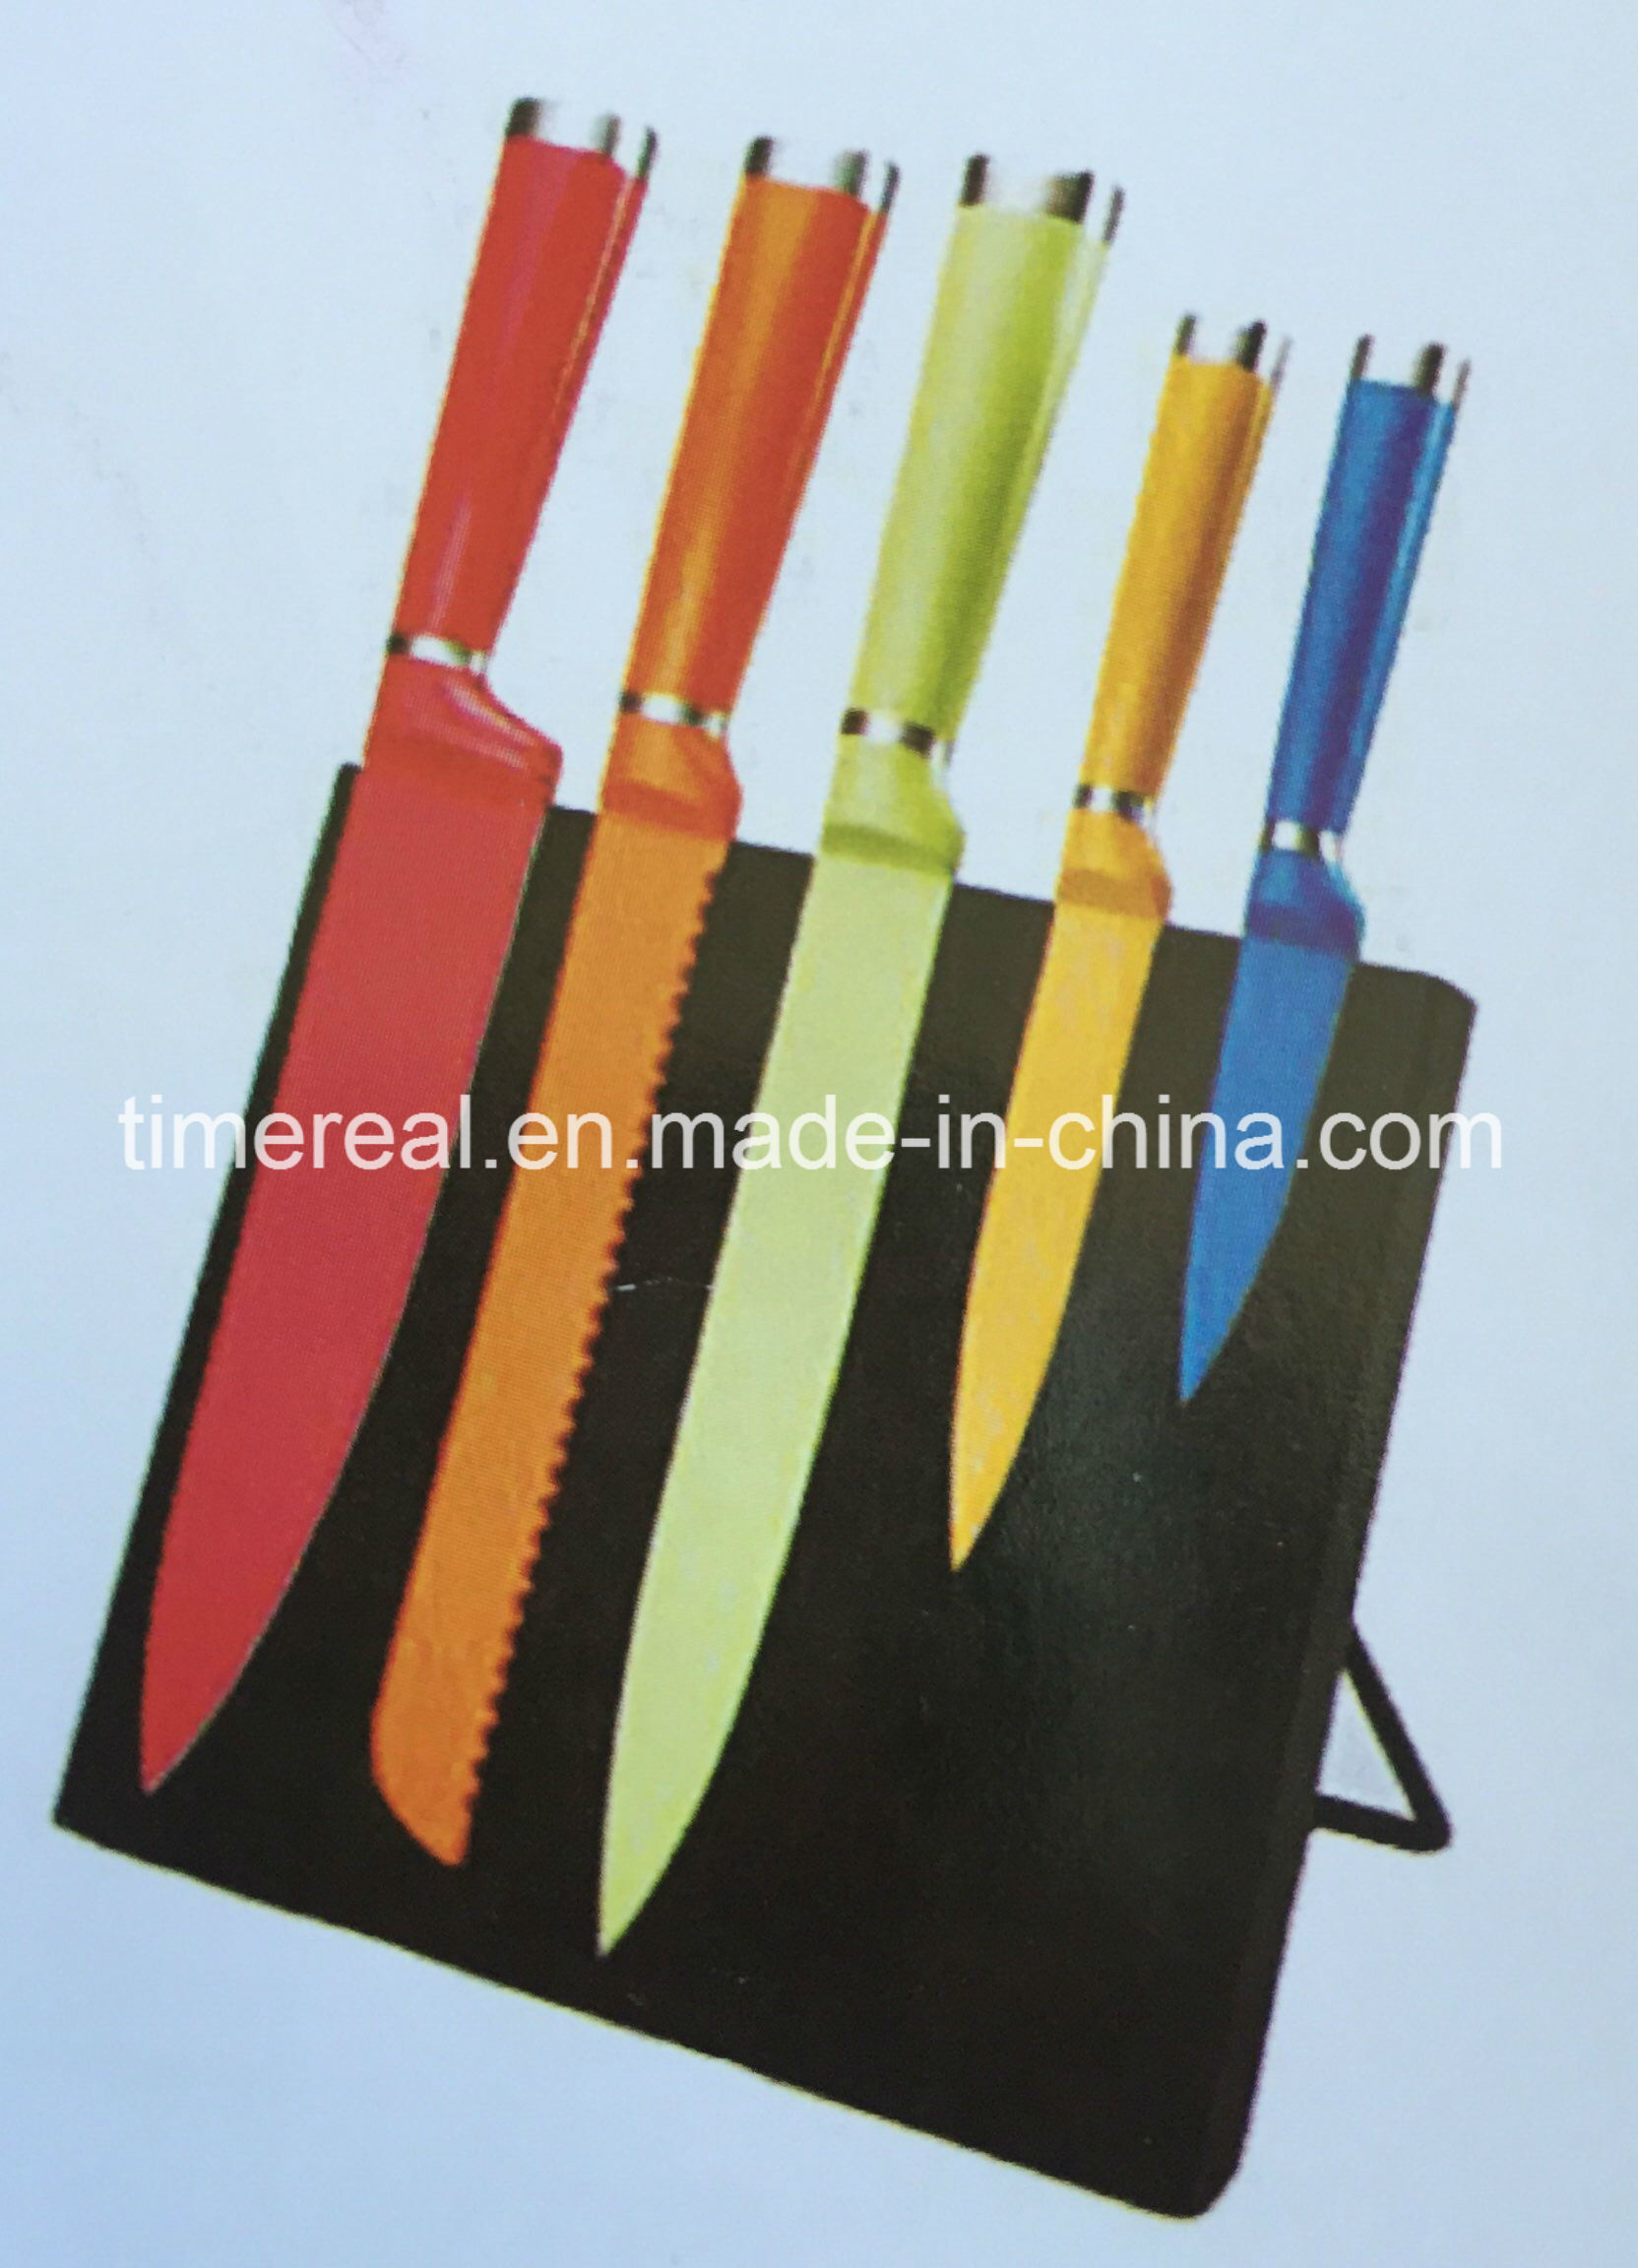 Stainless Steel Kitchen Knives Set with Painting No. Fj-0058